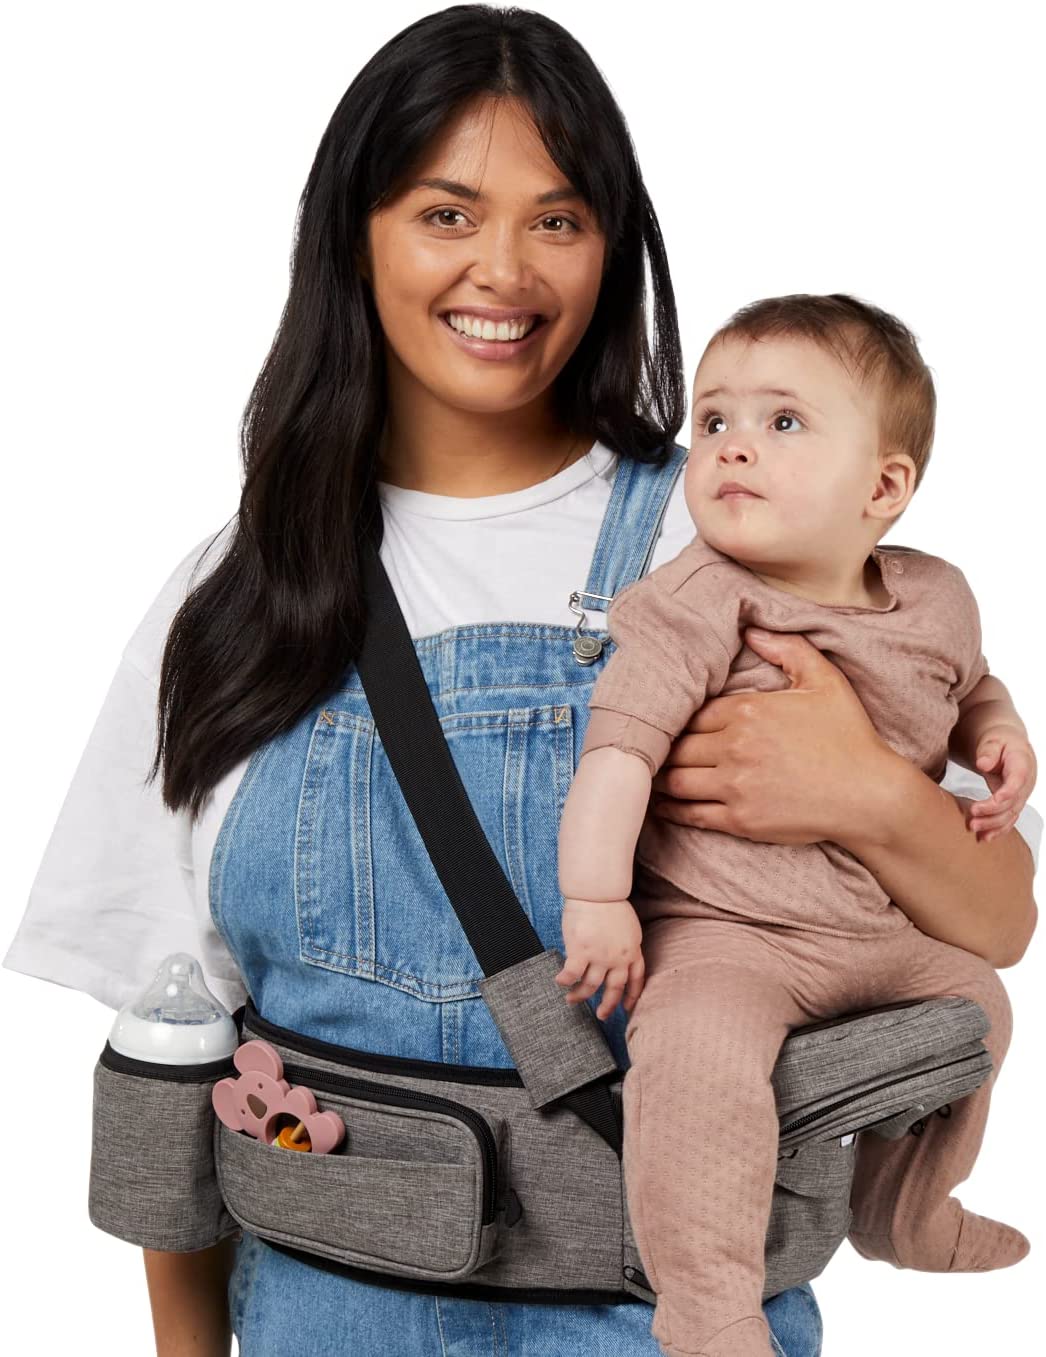 CLOUD MUM INC Baby Hip Seat Carrier – Gadget/Sling That Holds Essential Items, Bottle Insulator, 5 Pockets for Necessities – Ergonomic, Carries 7-45 lbs, Suitable for Newborn to 36 Month Old Toddler.